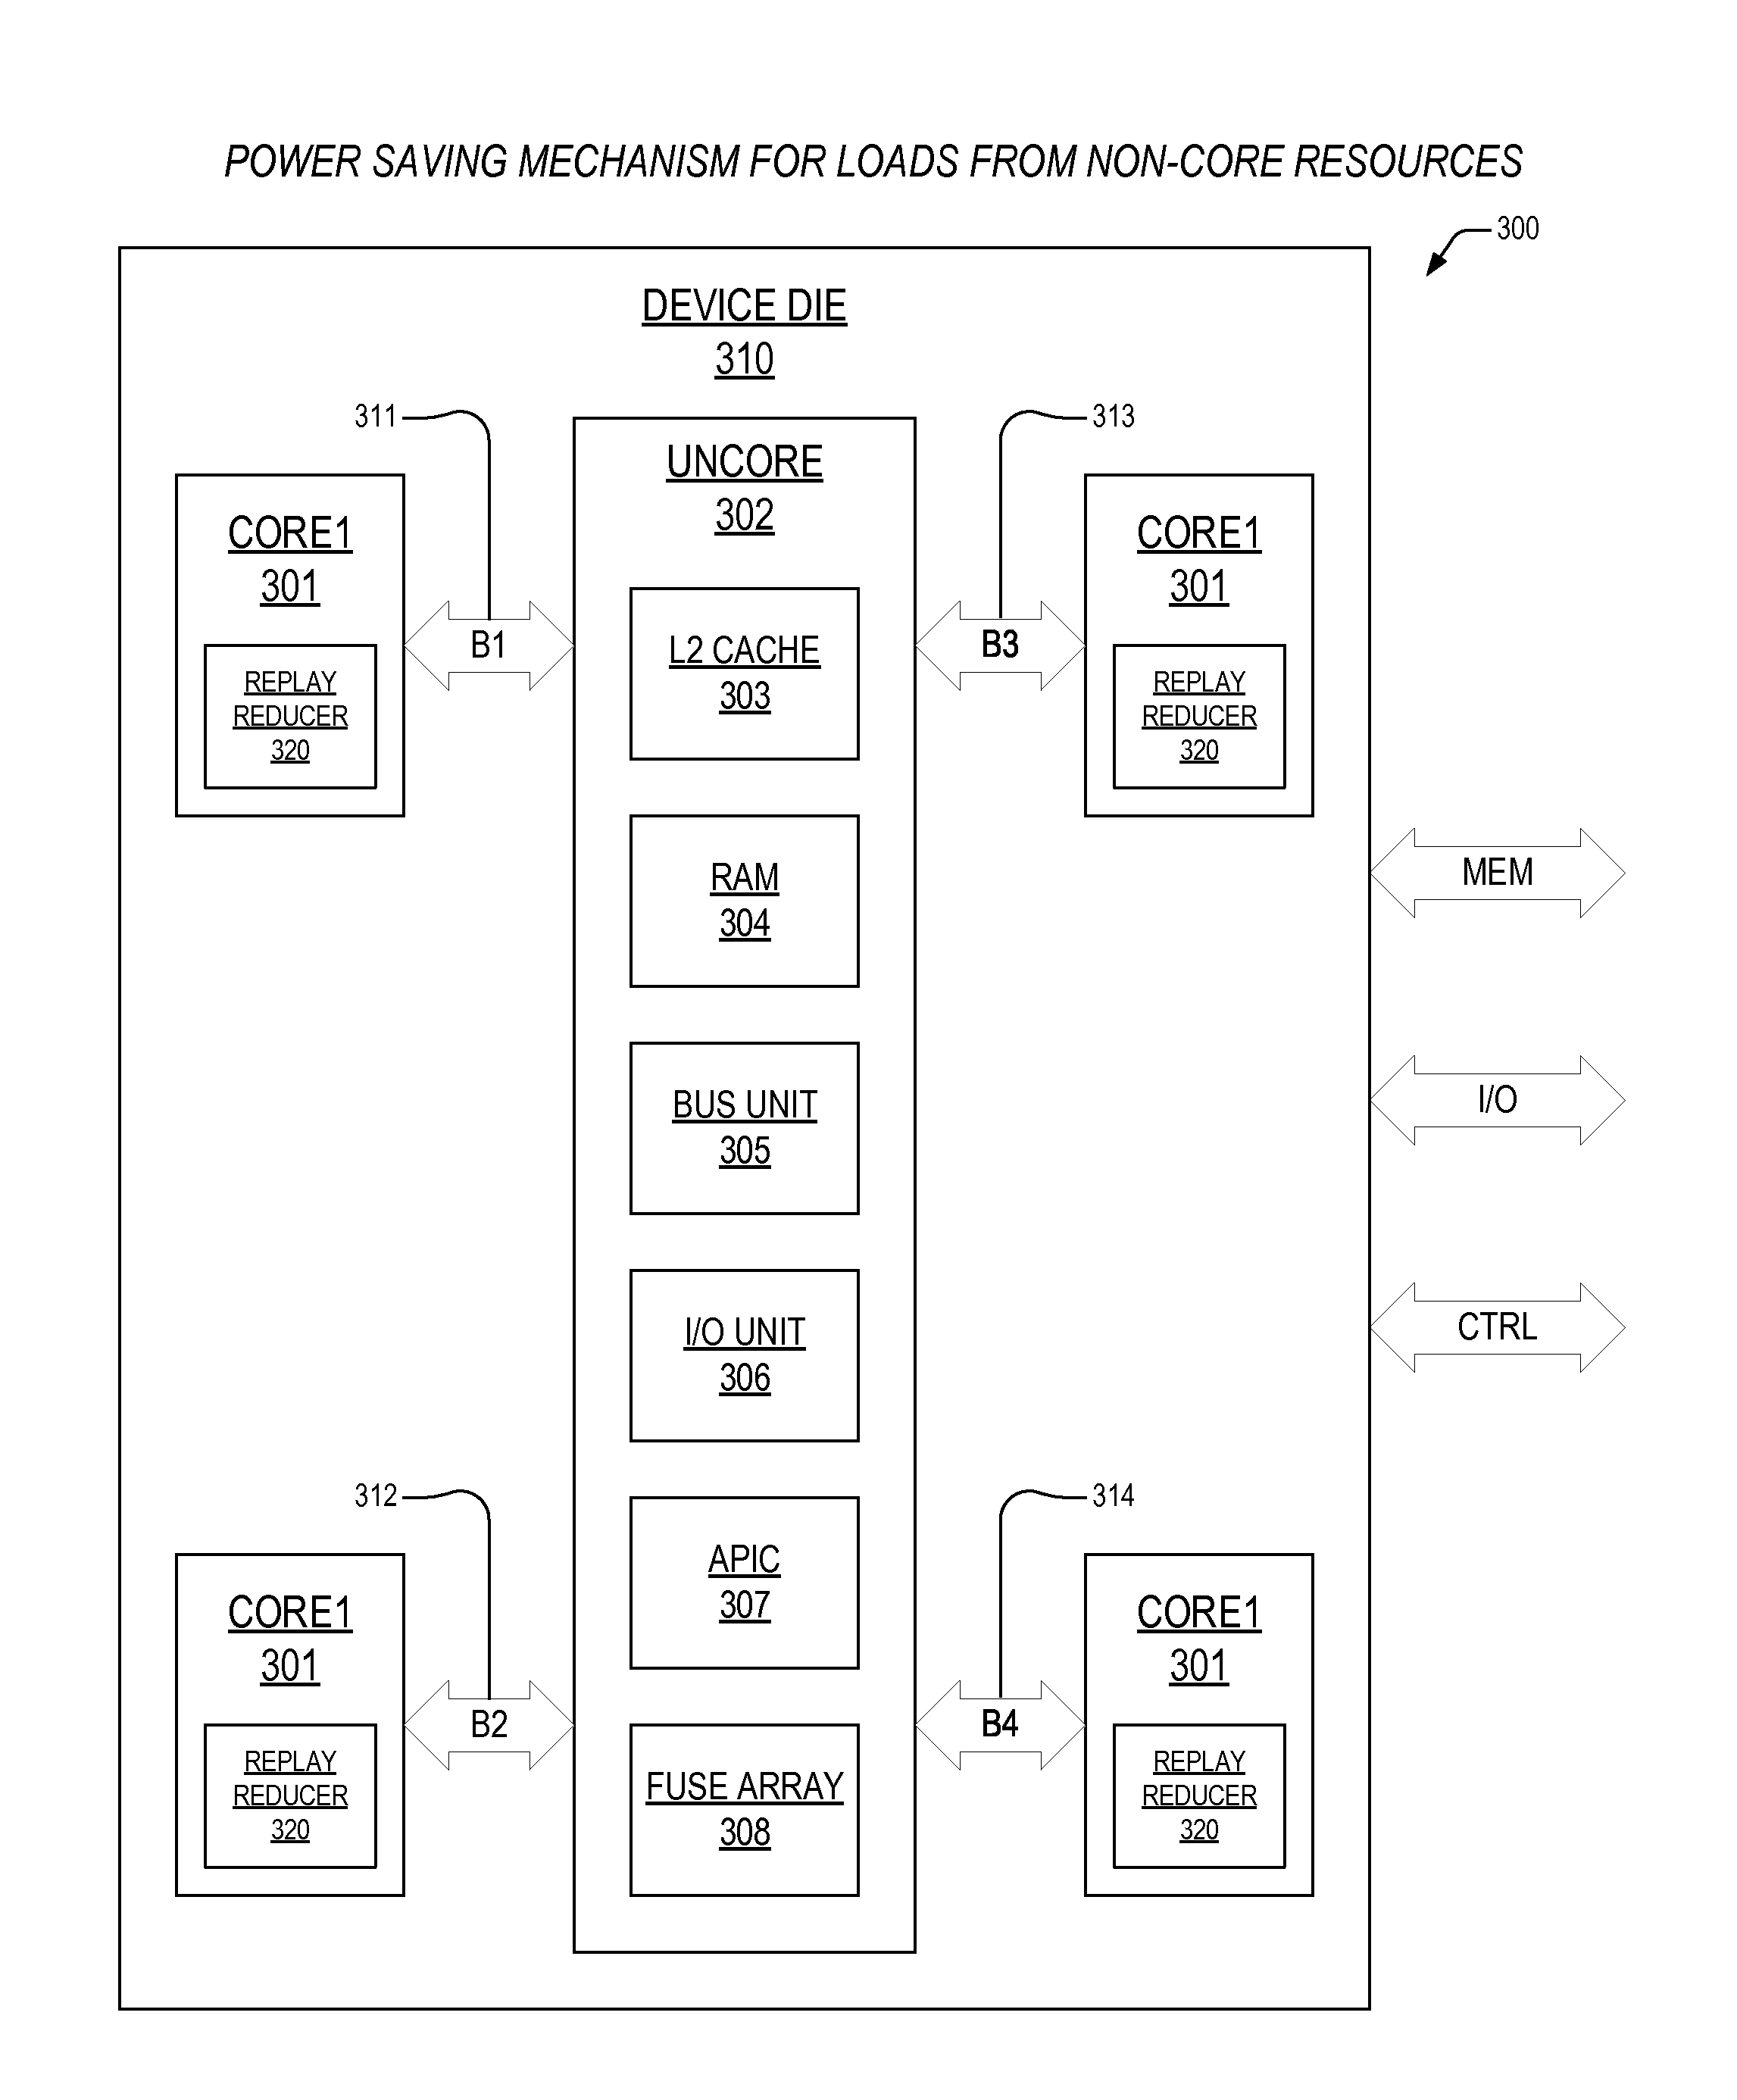 Mechanism to preclude load replays dependent on page walks in an out-of-order processor